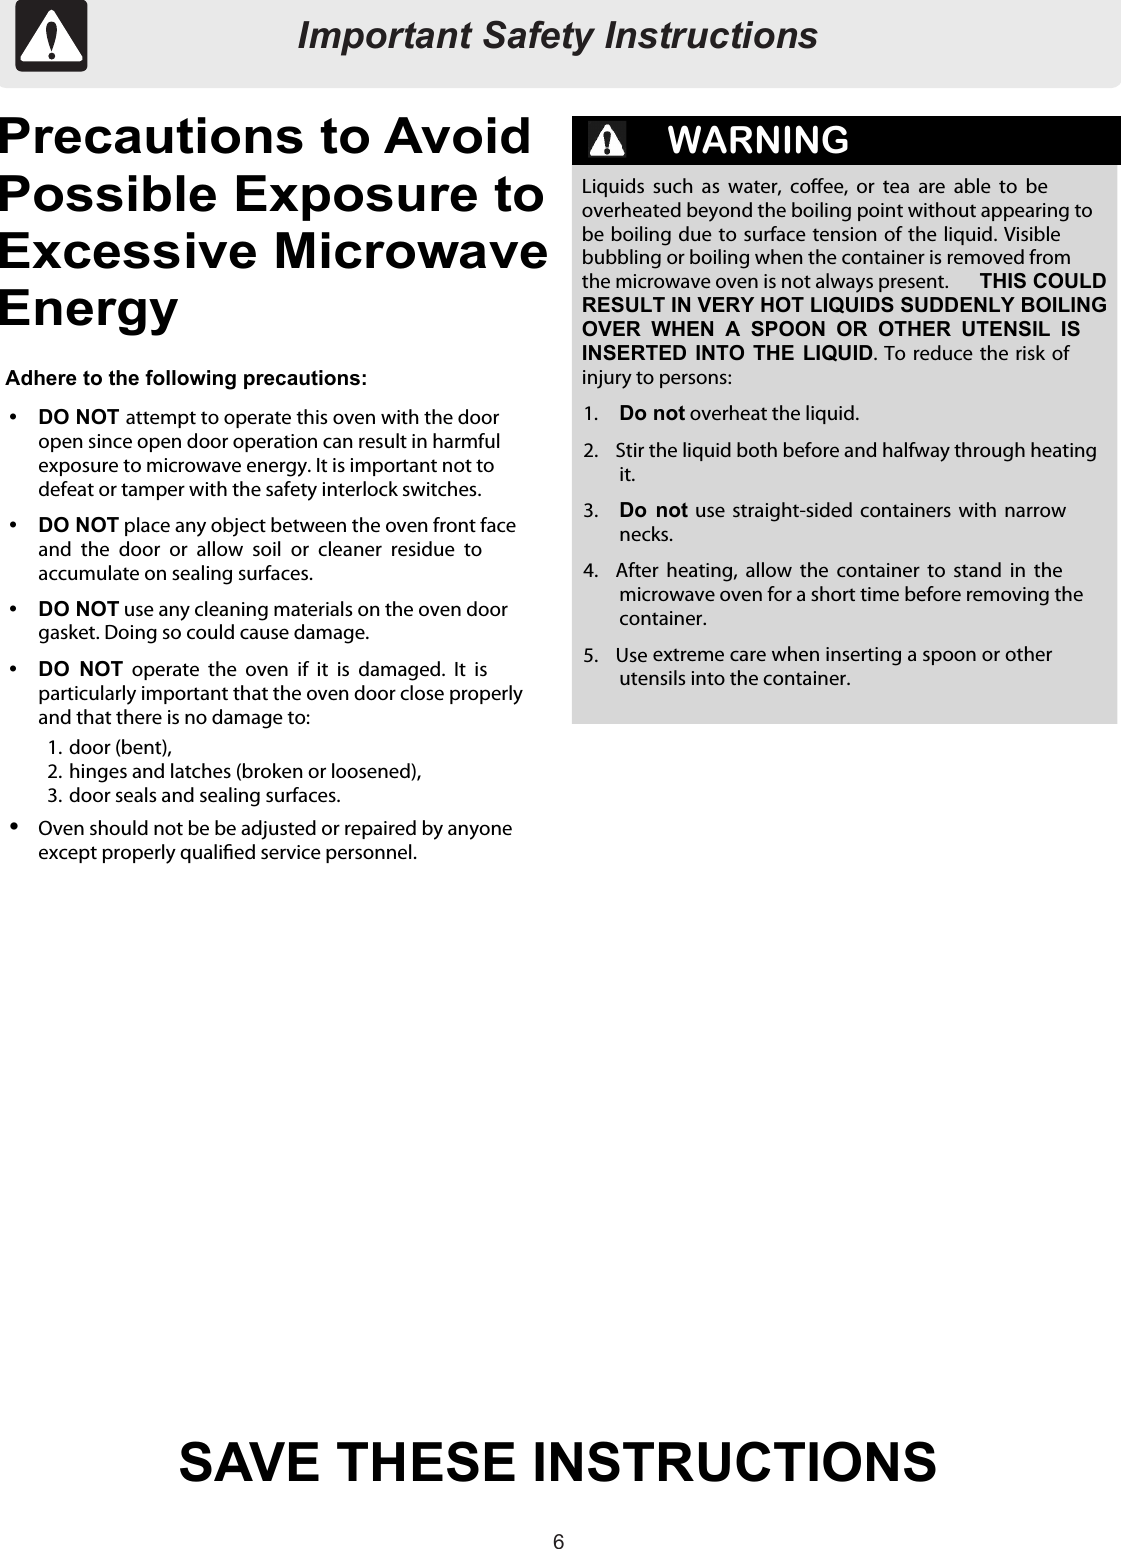 66Important Safety InstructionsSAVE THESE INSTRUCTIONSPrecautions to AvoidPossible Exposure toExcessive MicrowaveEnergyWARNINGAdhere to the following precautions:DO NOT attempt to operate this oven with the dooropen since open door operation can result in harmfulexposure to microwave energy. It is important not todefeat or tamper with the safety interlock switches.DO NOT place any object between the oven front faceand  the door  or  allow  soil  or  cleaner  residue  toaccumulate on sealing surfaces.DO NOT use any cleaning materials on the oven doorgasket. Doing so could cause damage.DO  NOT operate  the oven  if  it  is  damaged.  It  isparticularly important that the oven door close properlyand that there is no damage to:1.  door (bent),2.  hinges and latches (broken or loosened),3.  door seals and sealing surfaces.Oven should not be be adjusted or repaired by anyoneexcept properly qualied service personnel.Liquids such as  water,  coee,  or  tea  are  able  to  beoverheated beyond the boiling point without appearing tobe boiling due to surface tension of the liquid. Visiblebubbling or boiling when the container is removed fromthe microwave oven is not always present. THIS COULDRESULT IN VERY HOT LIQUIDS SUDDENLY BOILINGOVER  WHEN  A  SPOON  OR  OTHER  UTENSIL  ISINSERTED INTO THE  LIQUID. To reduce  the  risk ofinjury to persons:1. Do not overheat the liquid.2.  Stir the liquid both before and halfway through heatingit.3. Do not use  straight-sided containers  with  narrownecks.4.  After  heating,  allow  the container  to  stand  in  themicrowave oven for a short time before removing thecontainer.5.  Use extreme care when inserting a spoon or otherutensils into the container.Important Safety Instructions